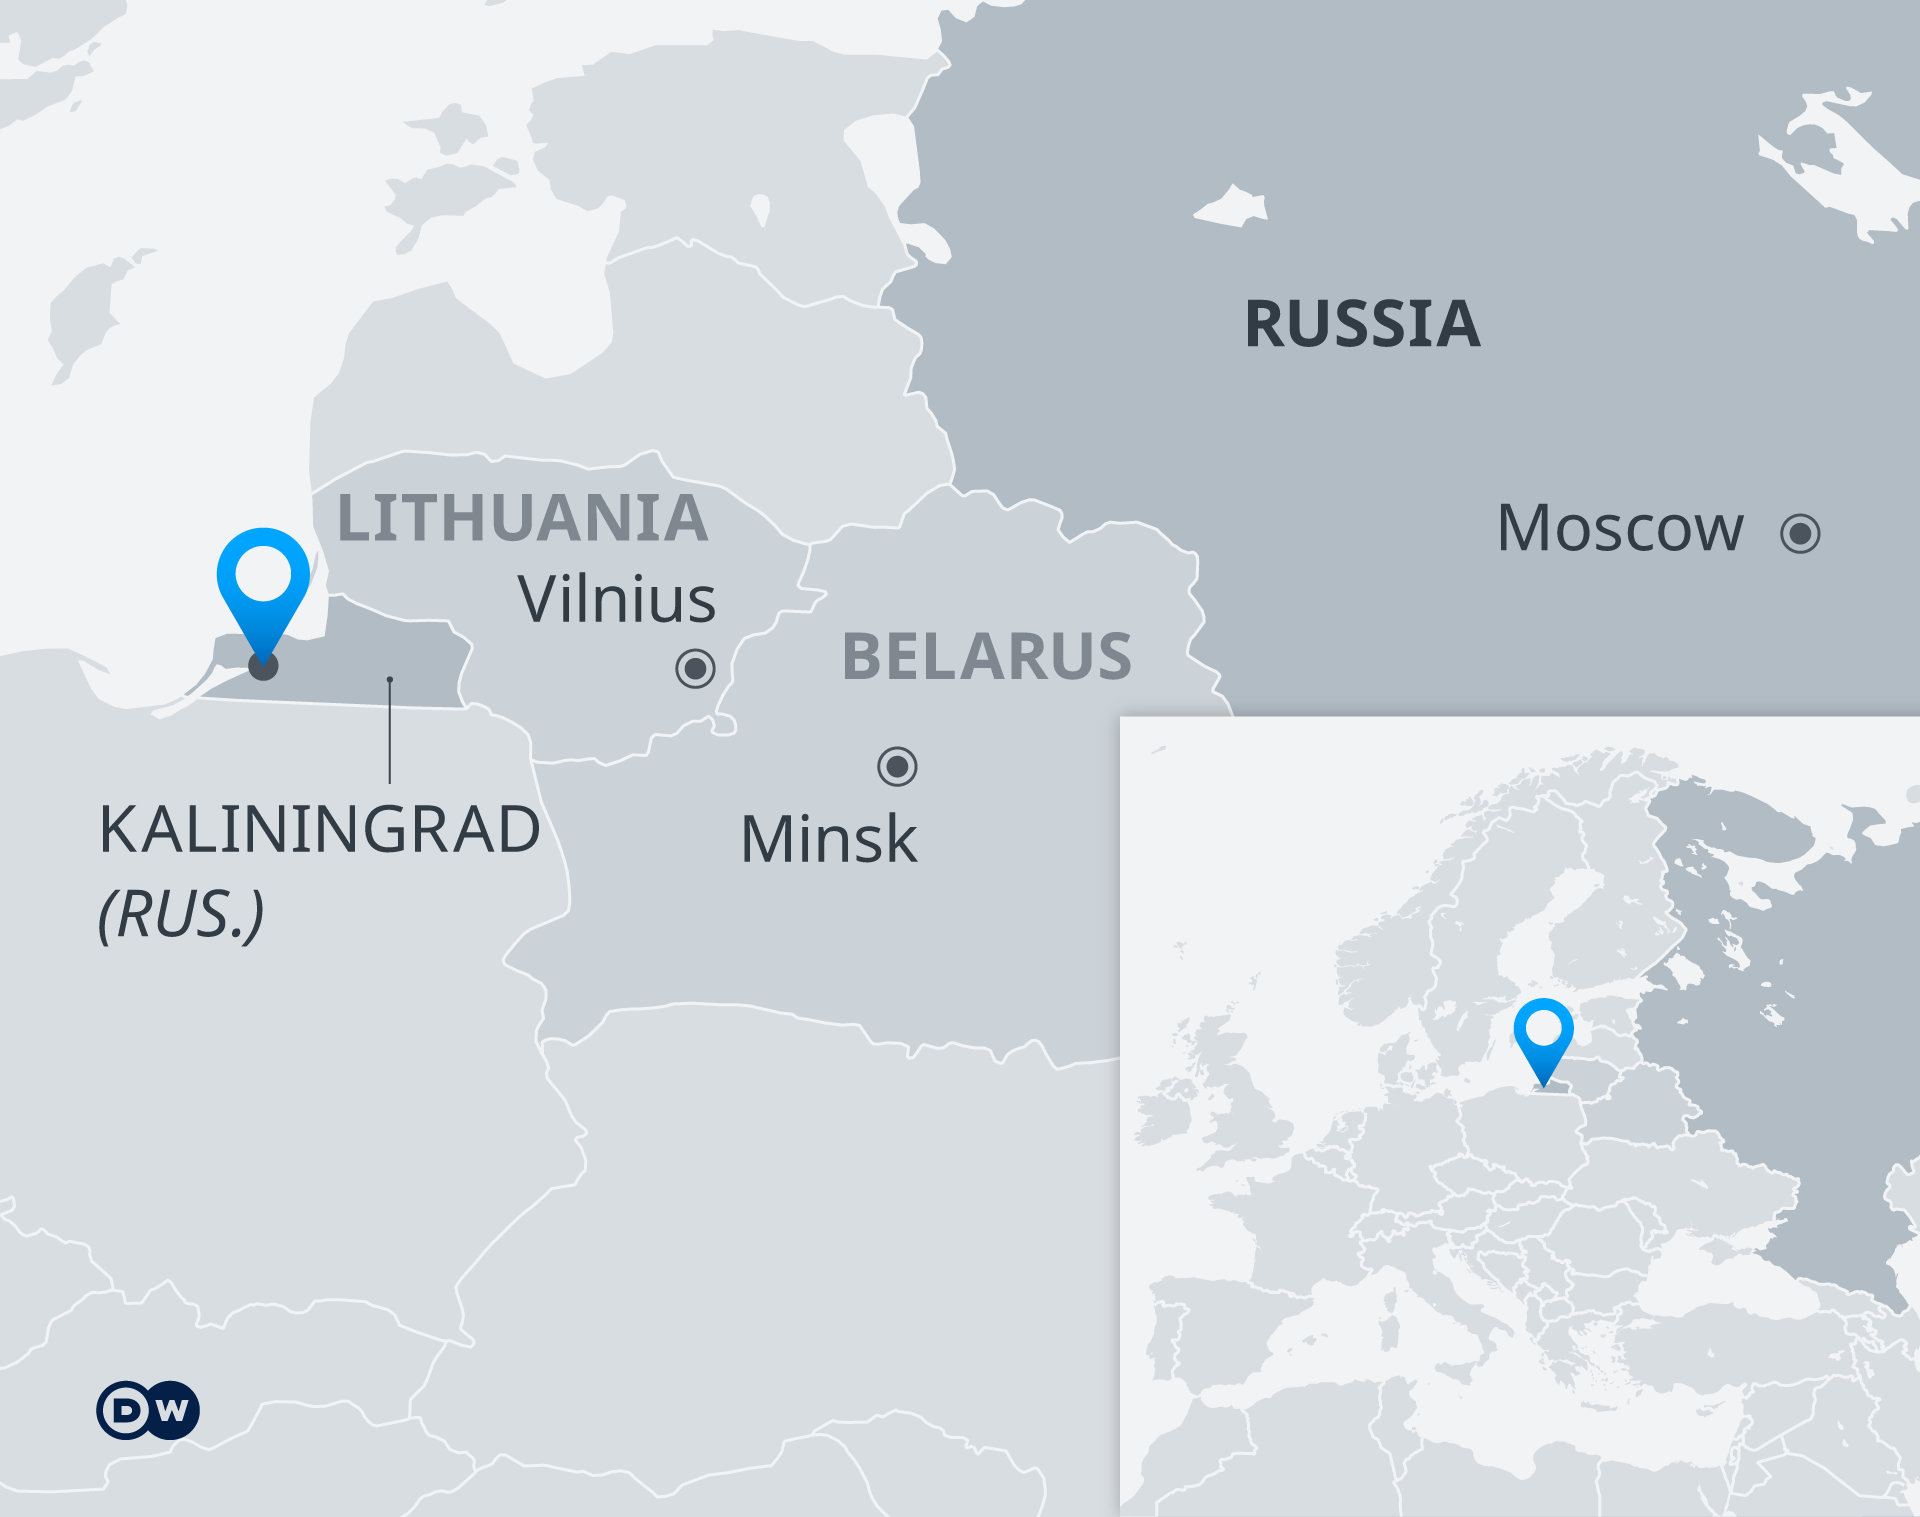 Map showing Kaliningrad and the countries around the Russian exclave